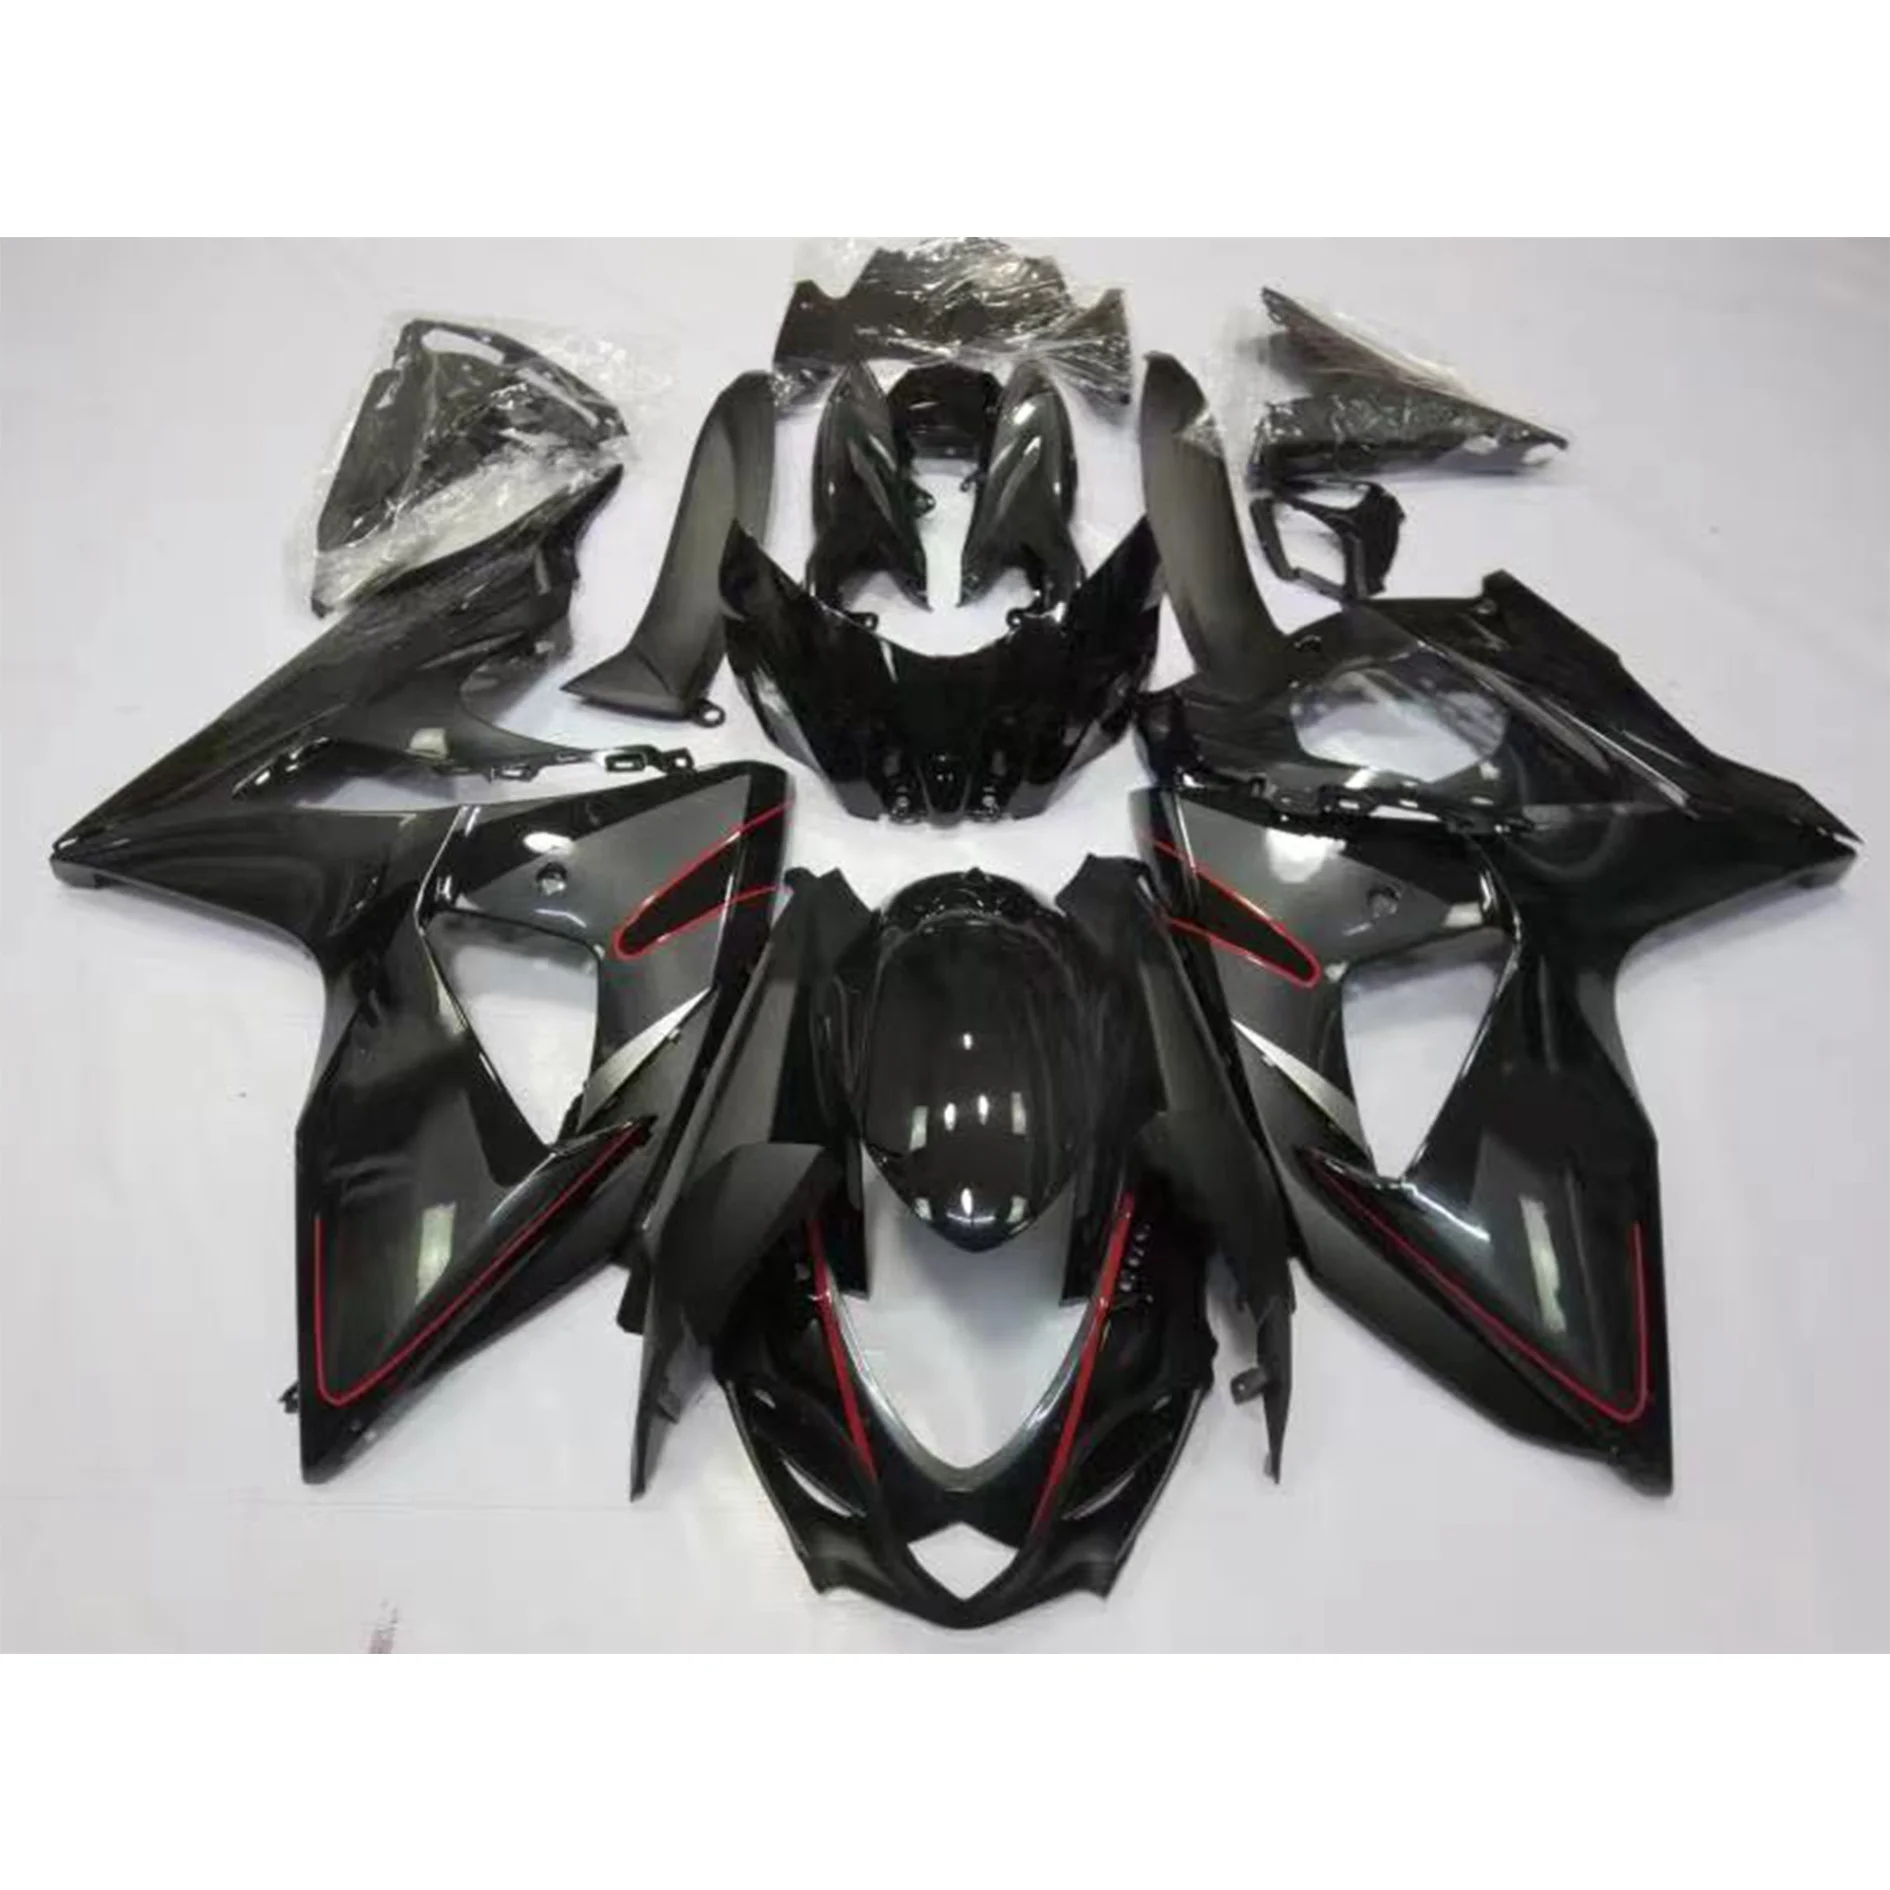 

2022 WHSC Matte Black And Red OEM Motorcycle Accessories For SUZUKI GSXR1000 2009-2016 Custom Cover Body Plastic Fairings Kit, Pictures shown